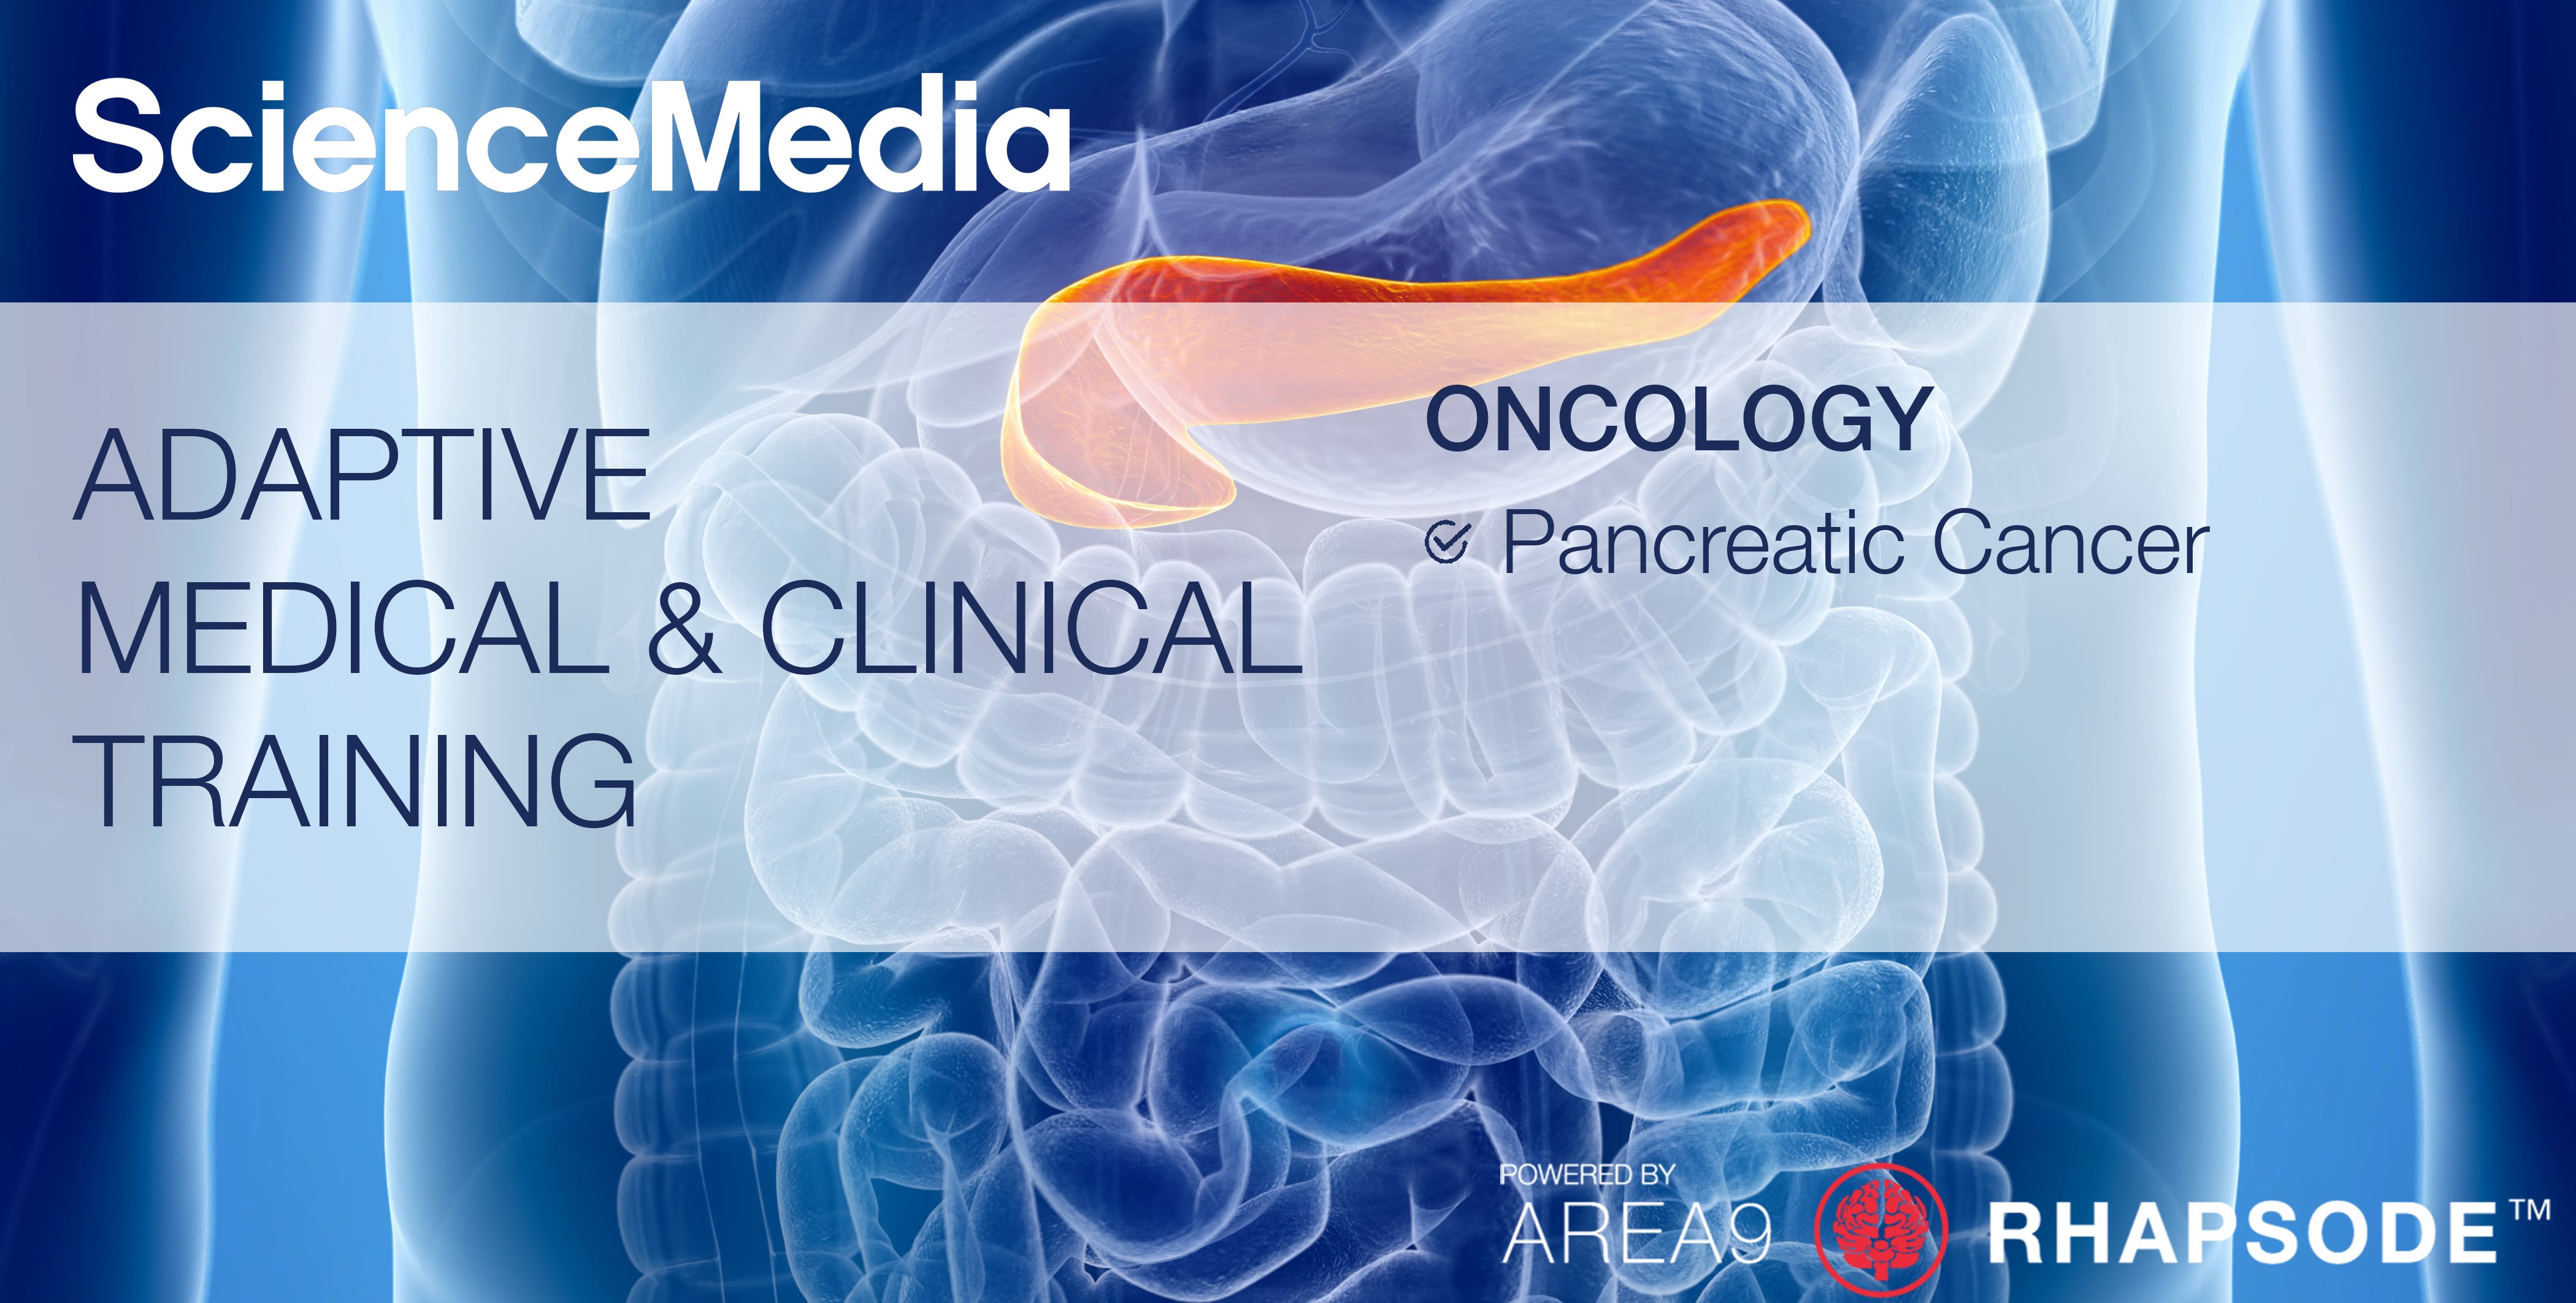 ONCOLOGY Pancreatic Cancer AREA9 LYCEUM and SCIENCEMEDIA Adaptive Medical & Clinical Training BANNER-1